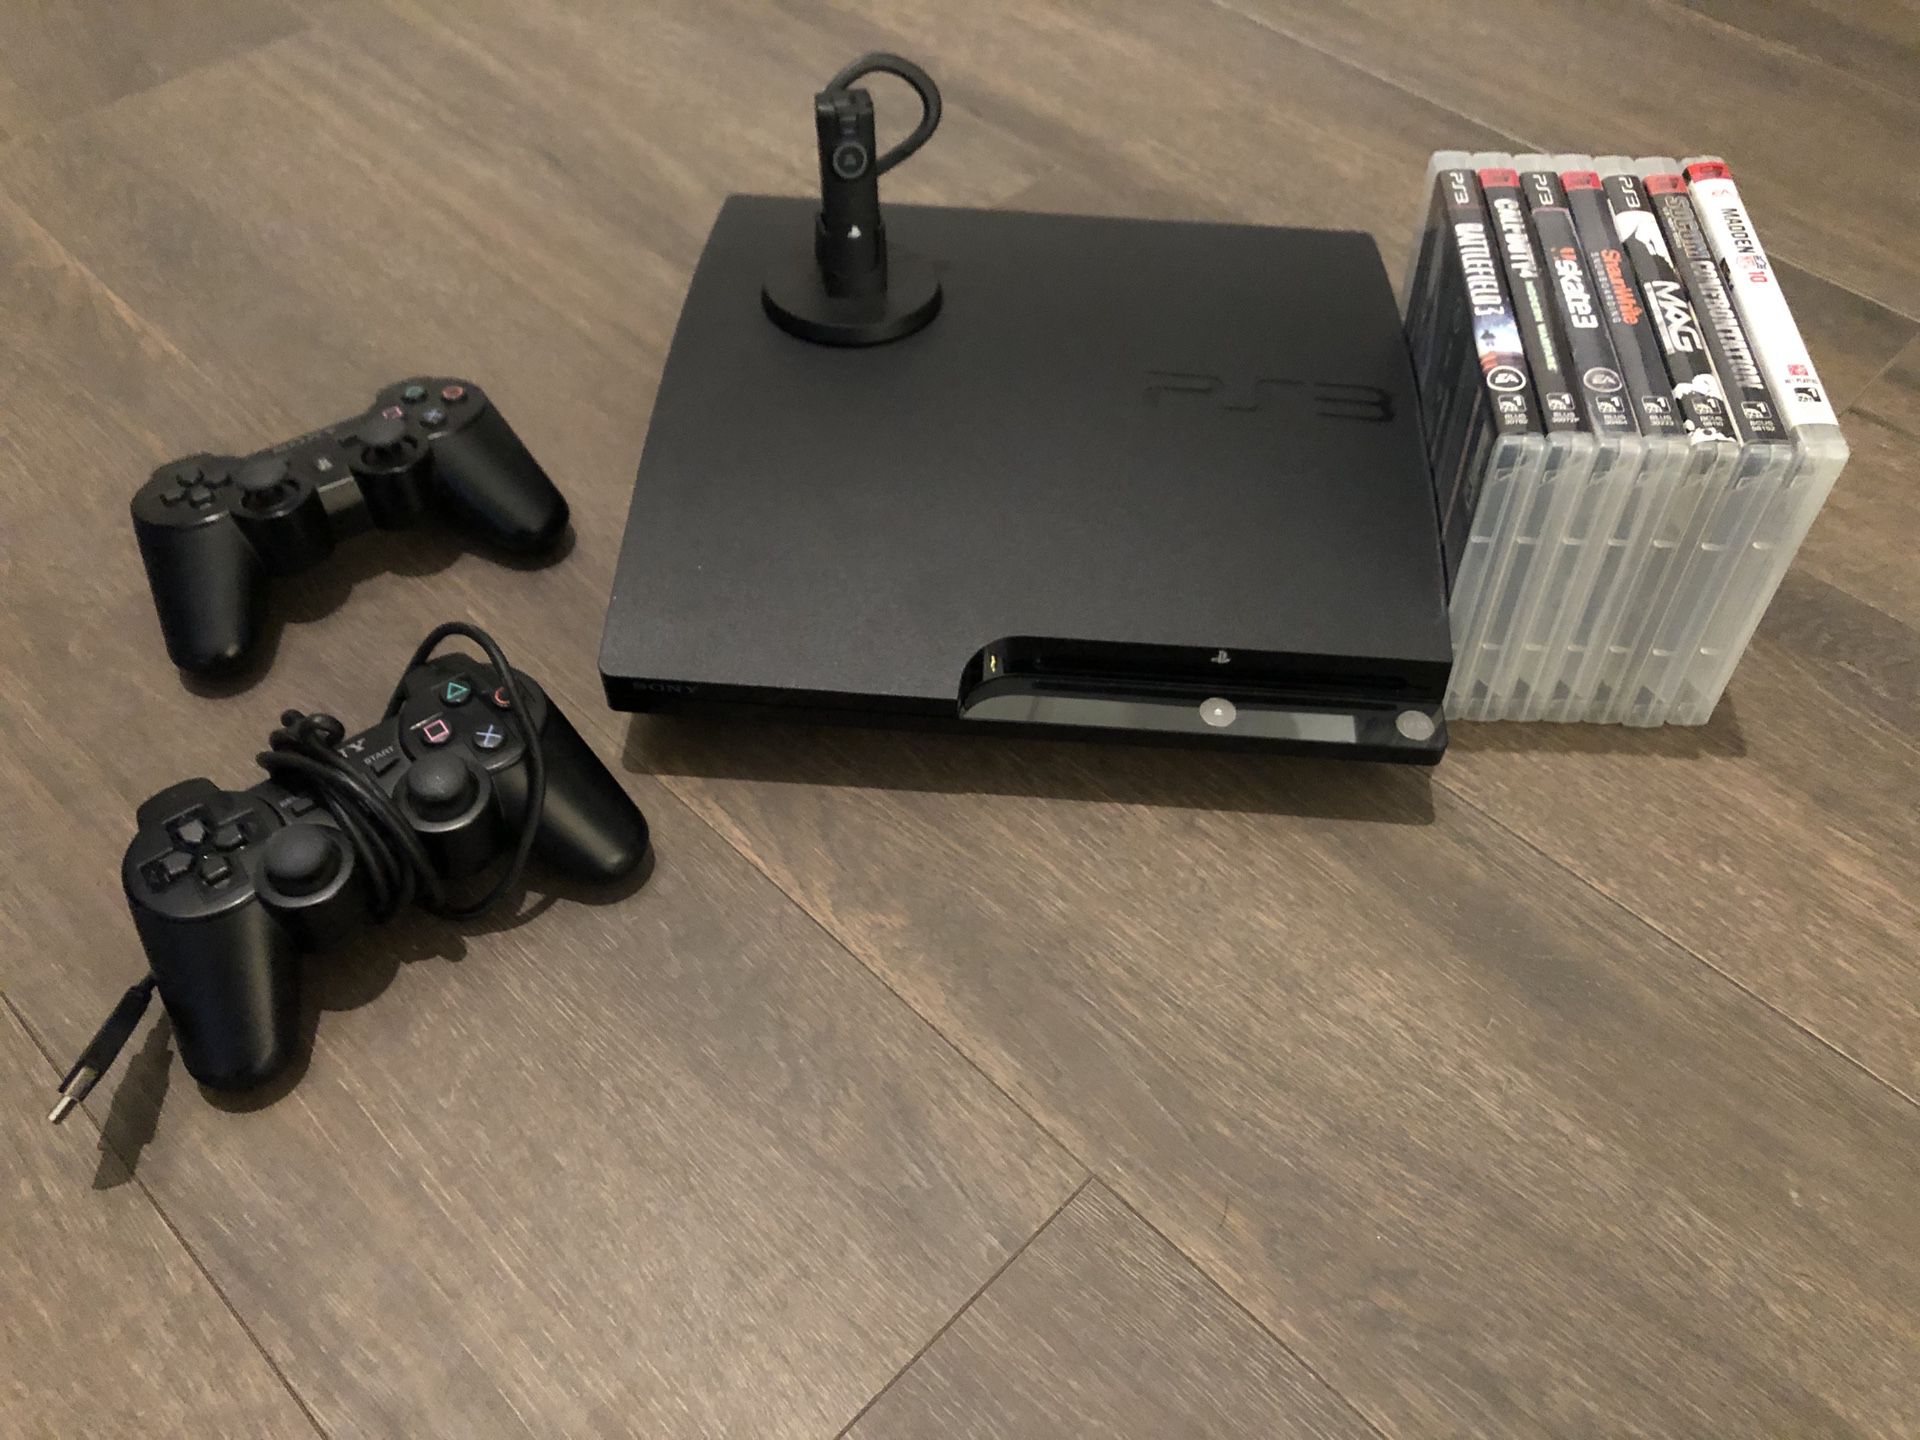 Slim design PS3 with all cables, 2 wireless controllers, wireless headphone and charger, and 7 games. Excellent condition!